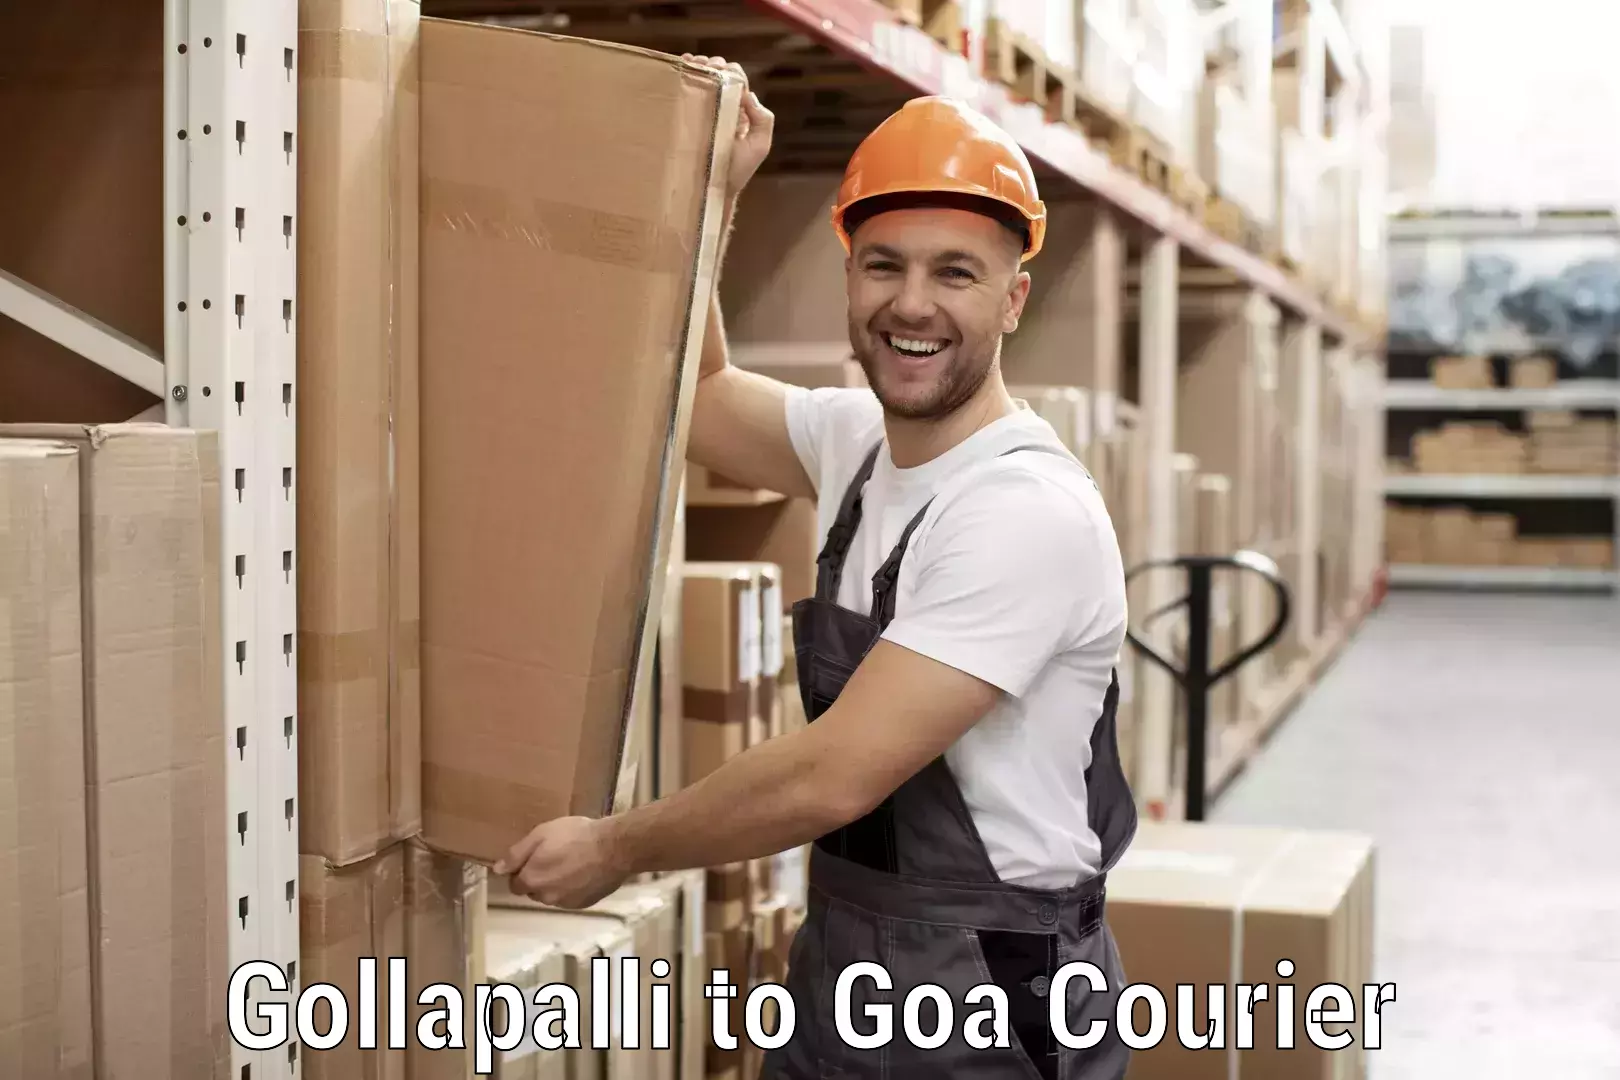 User-friendly delivery service Gollapalli to Goa